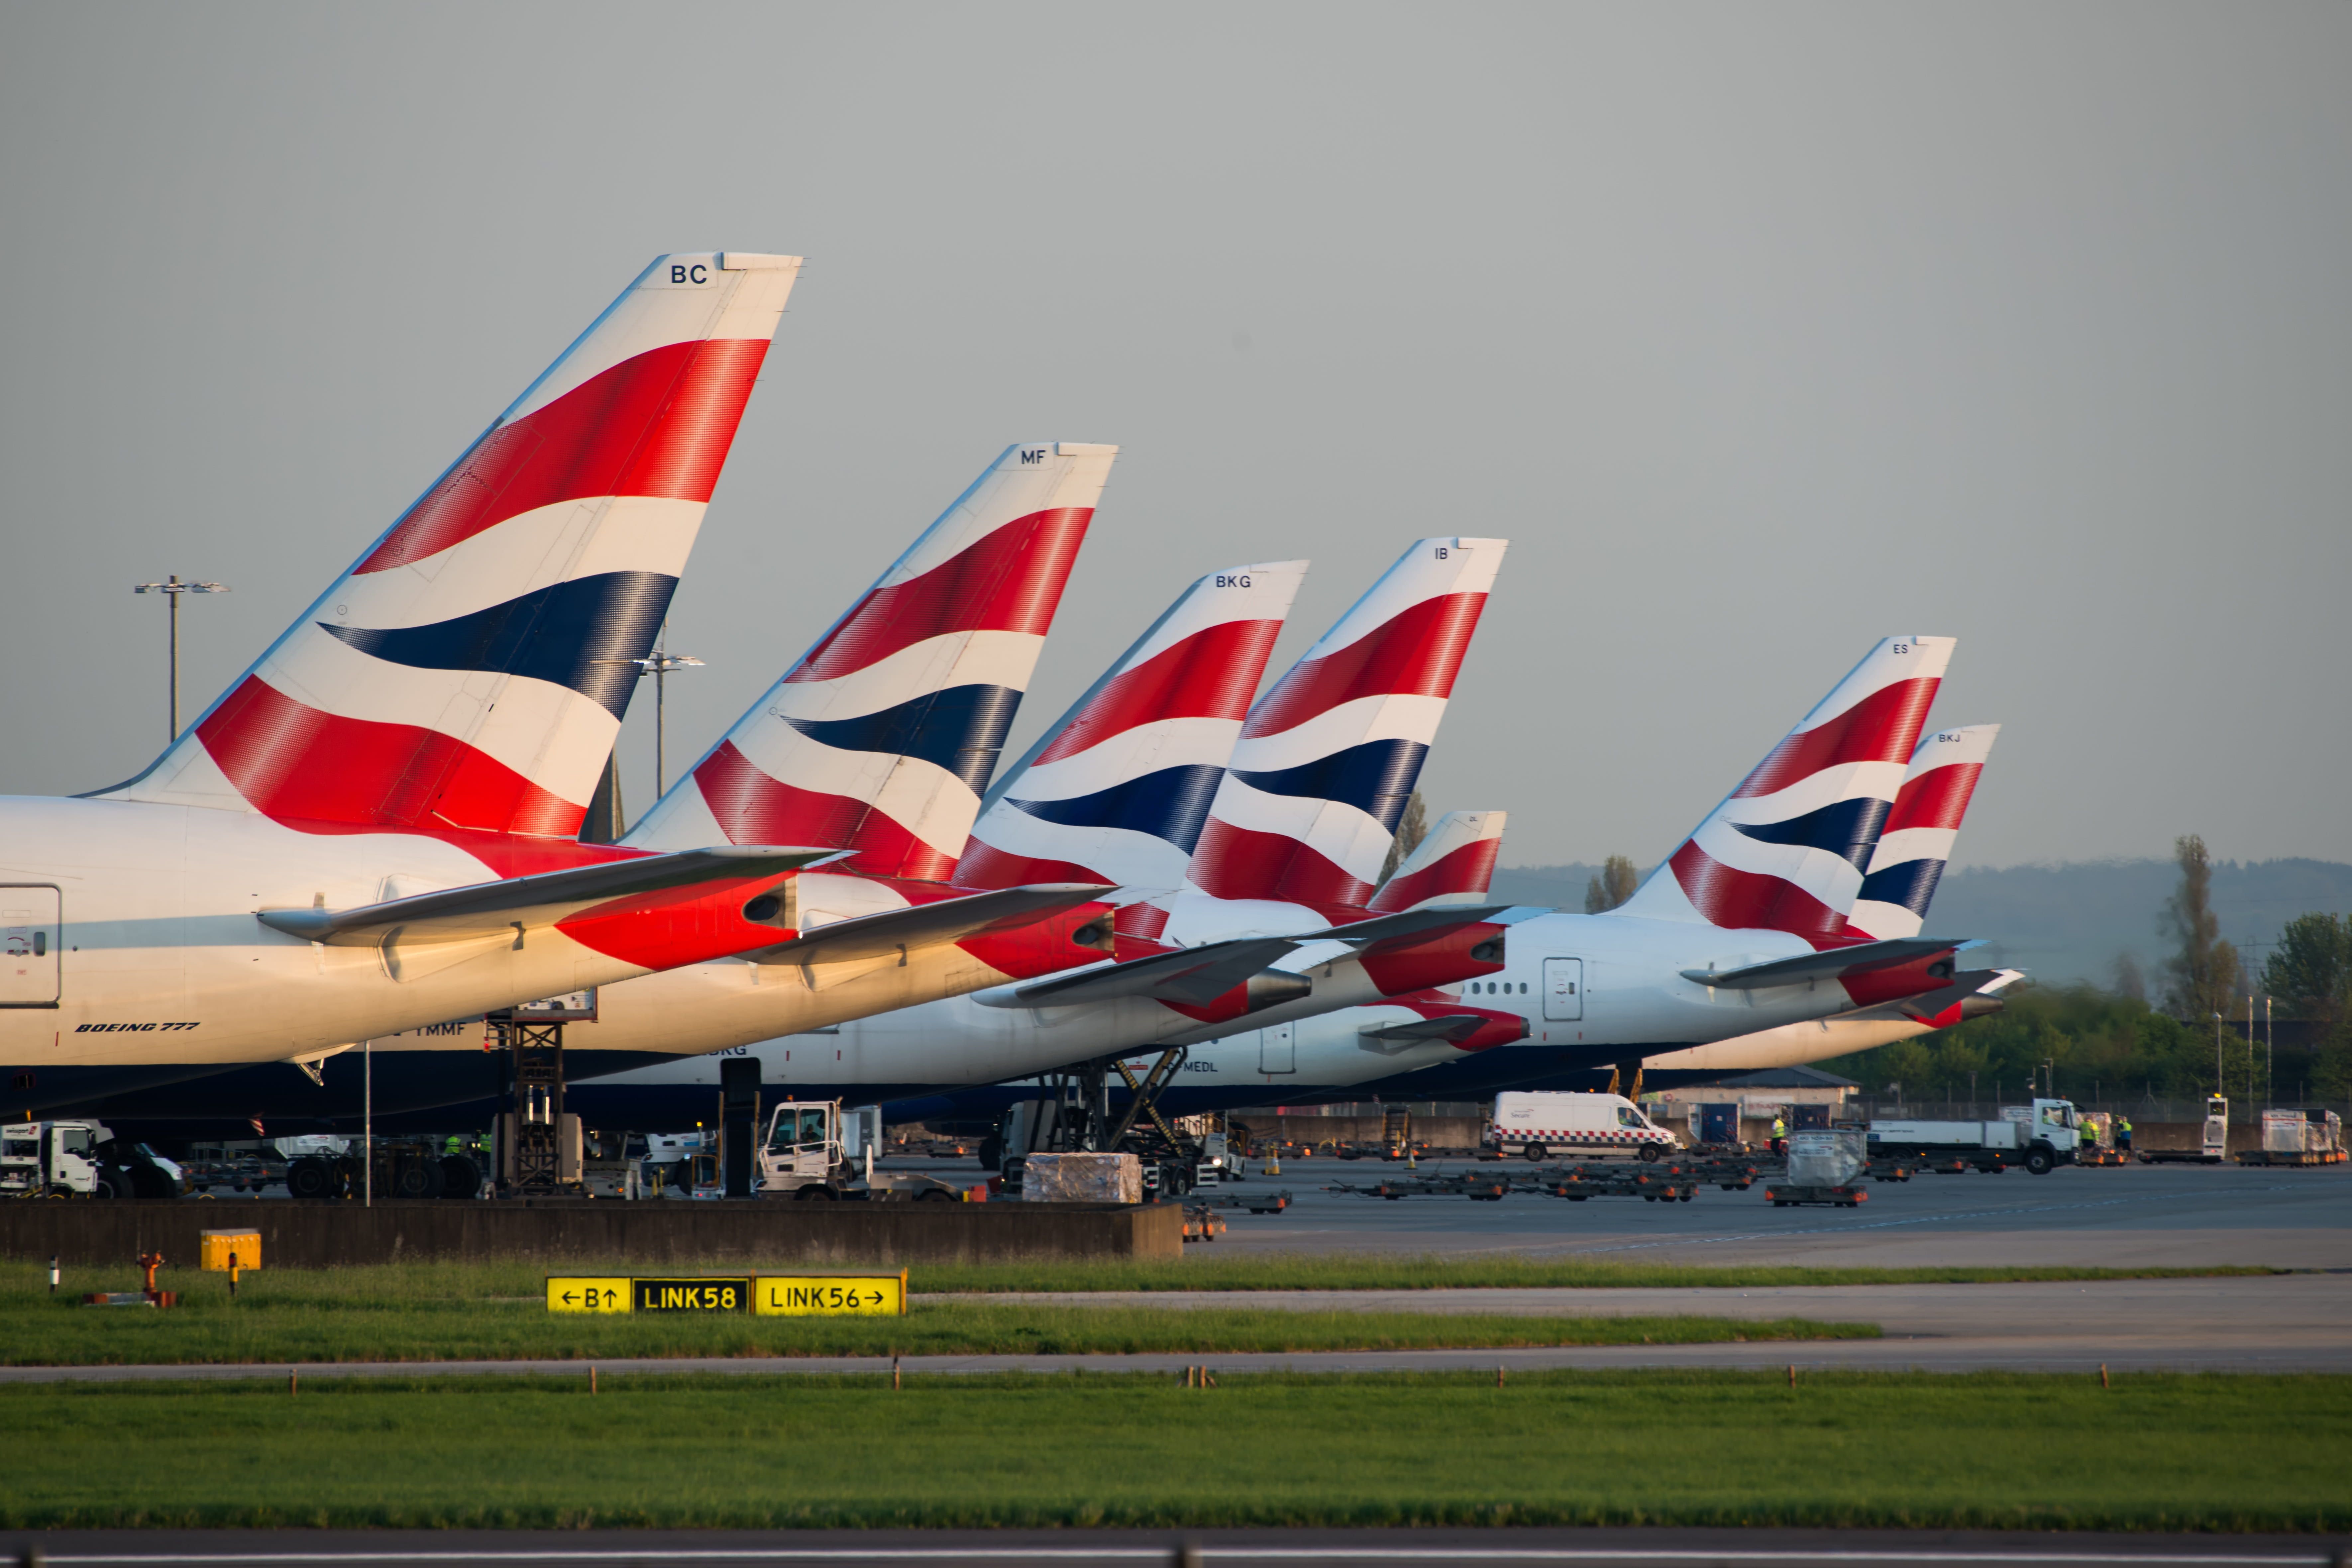 Many British Airways aircraft lined up.